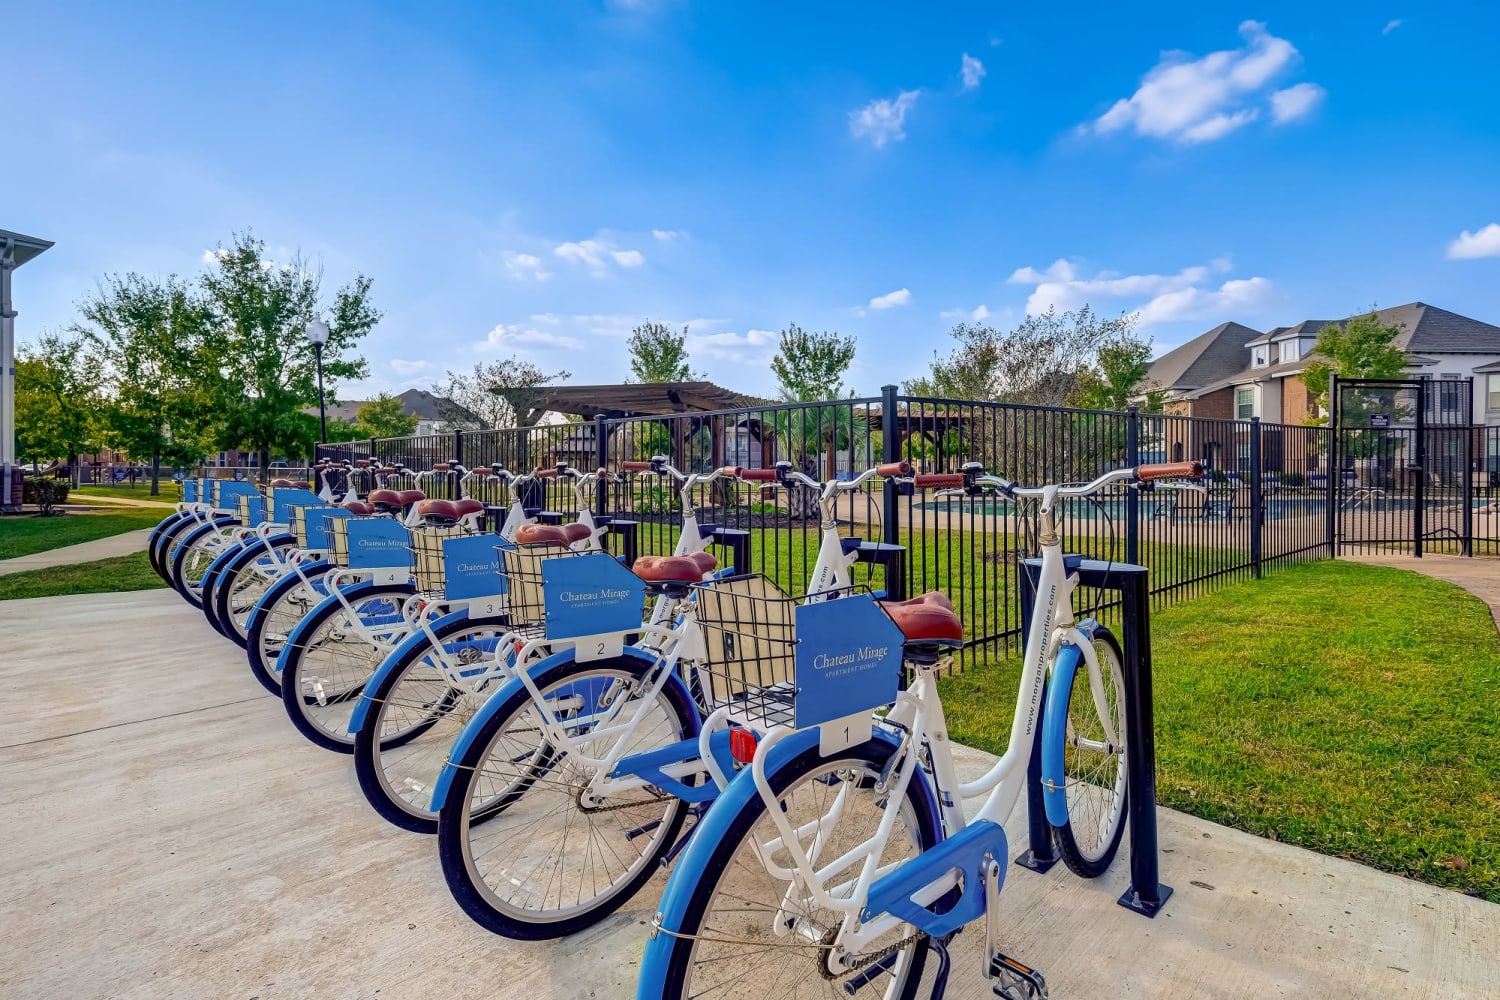 Rentable bike station at Chateau Mirage Apartment Homes in Lafayette, Louisiana